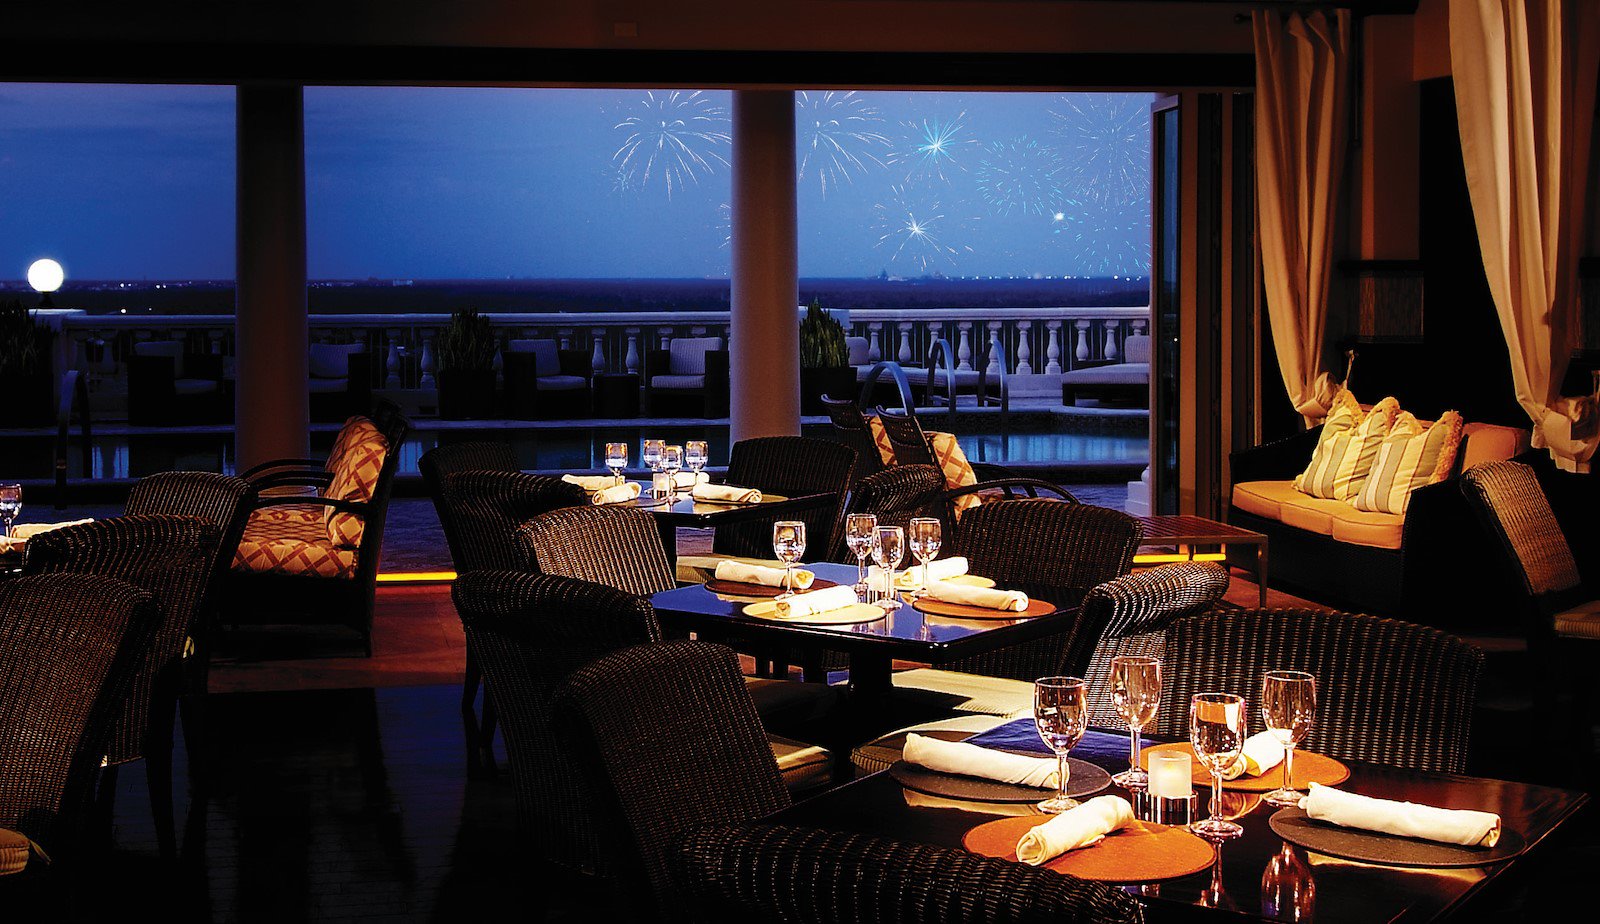 An evening view from inside of the Eleven restaurant located in Reunion Resort of the nighttime fireworks.